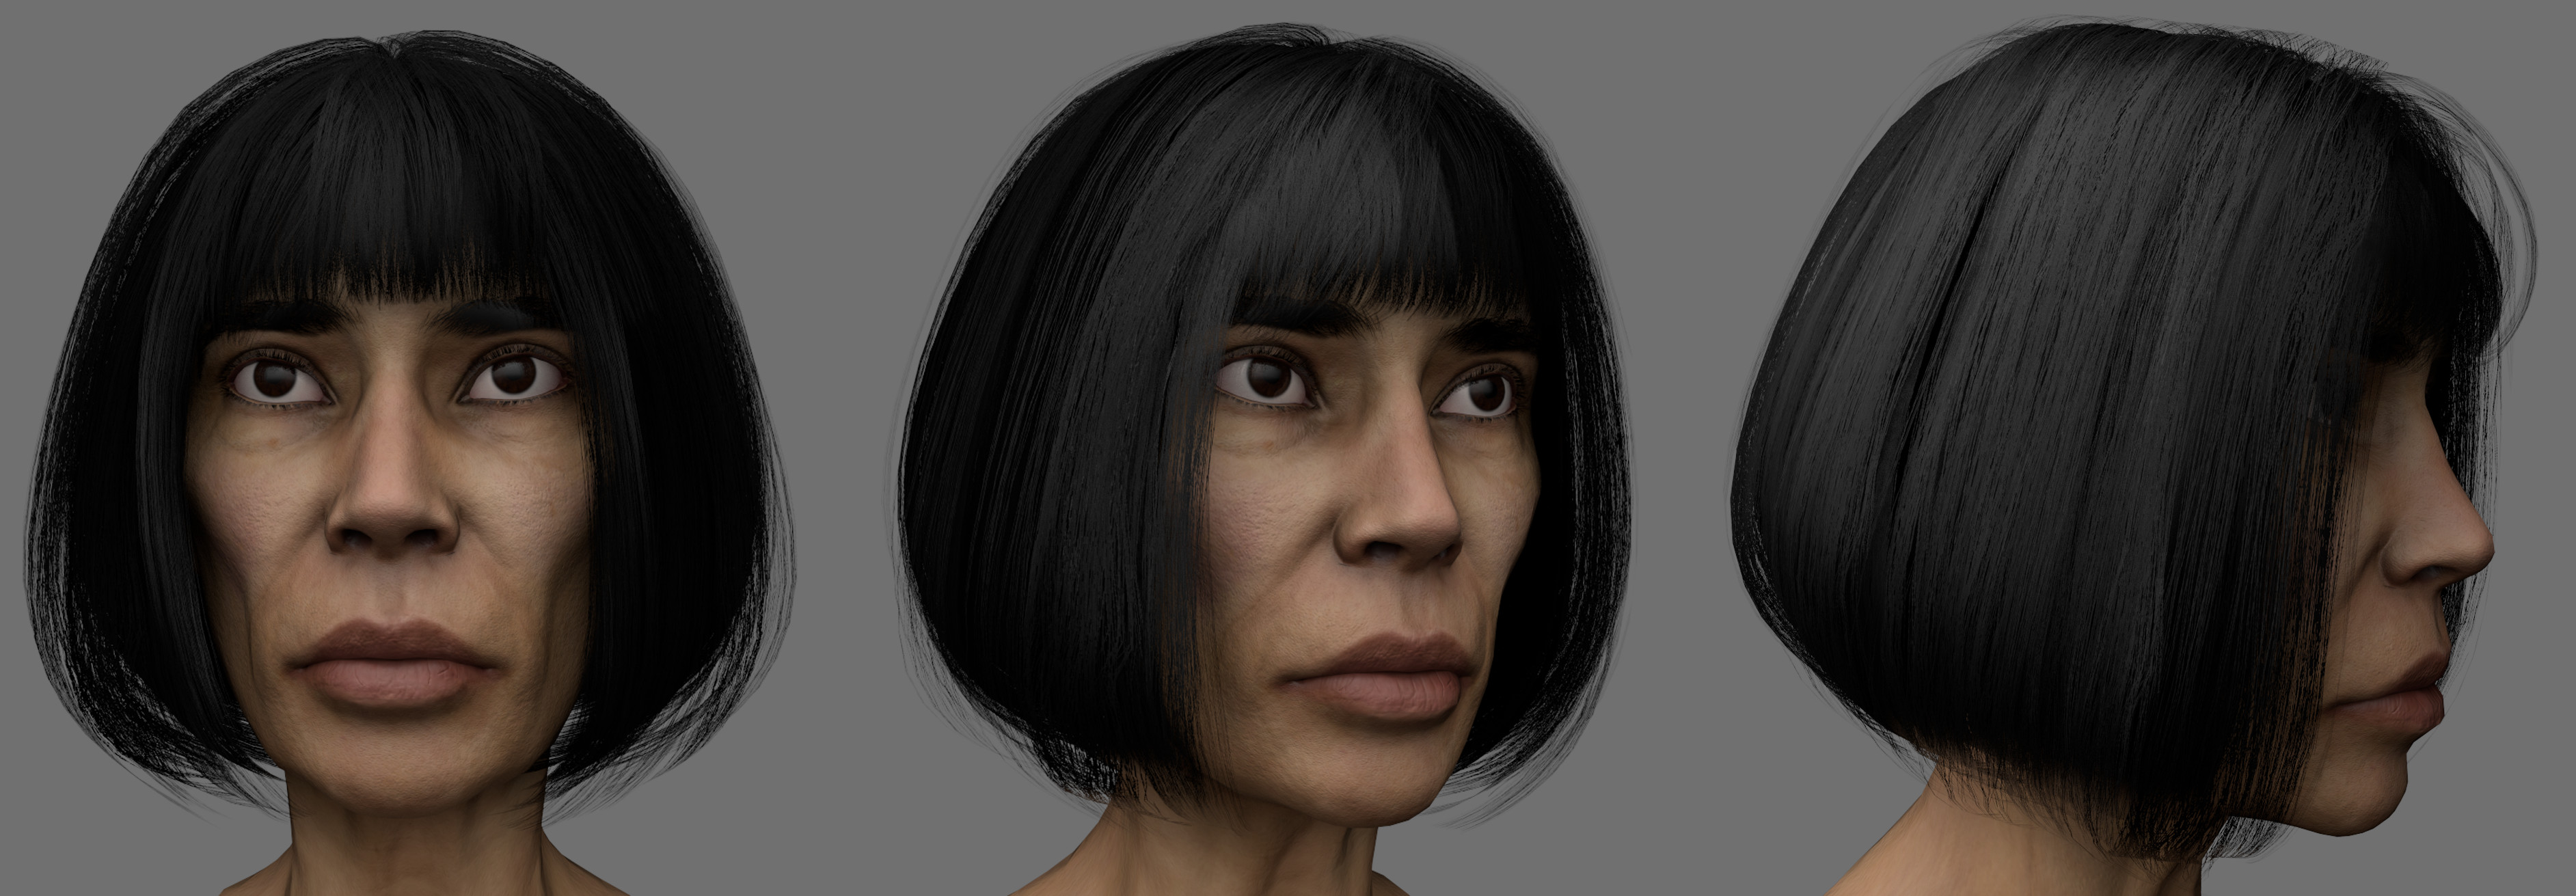 Substance Painter Haircards Render